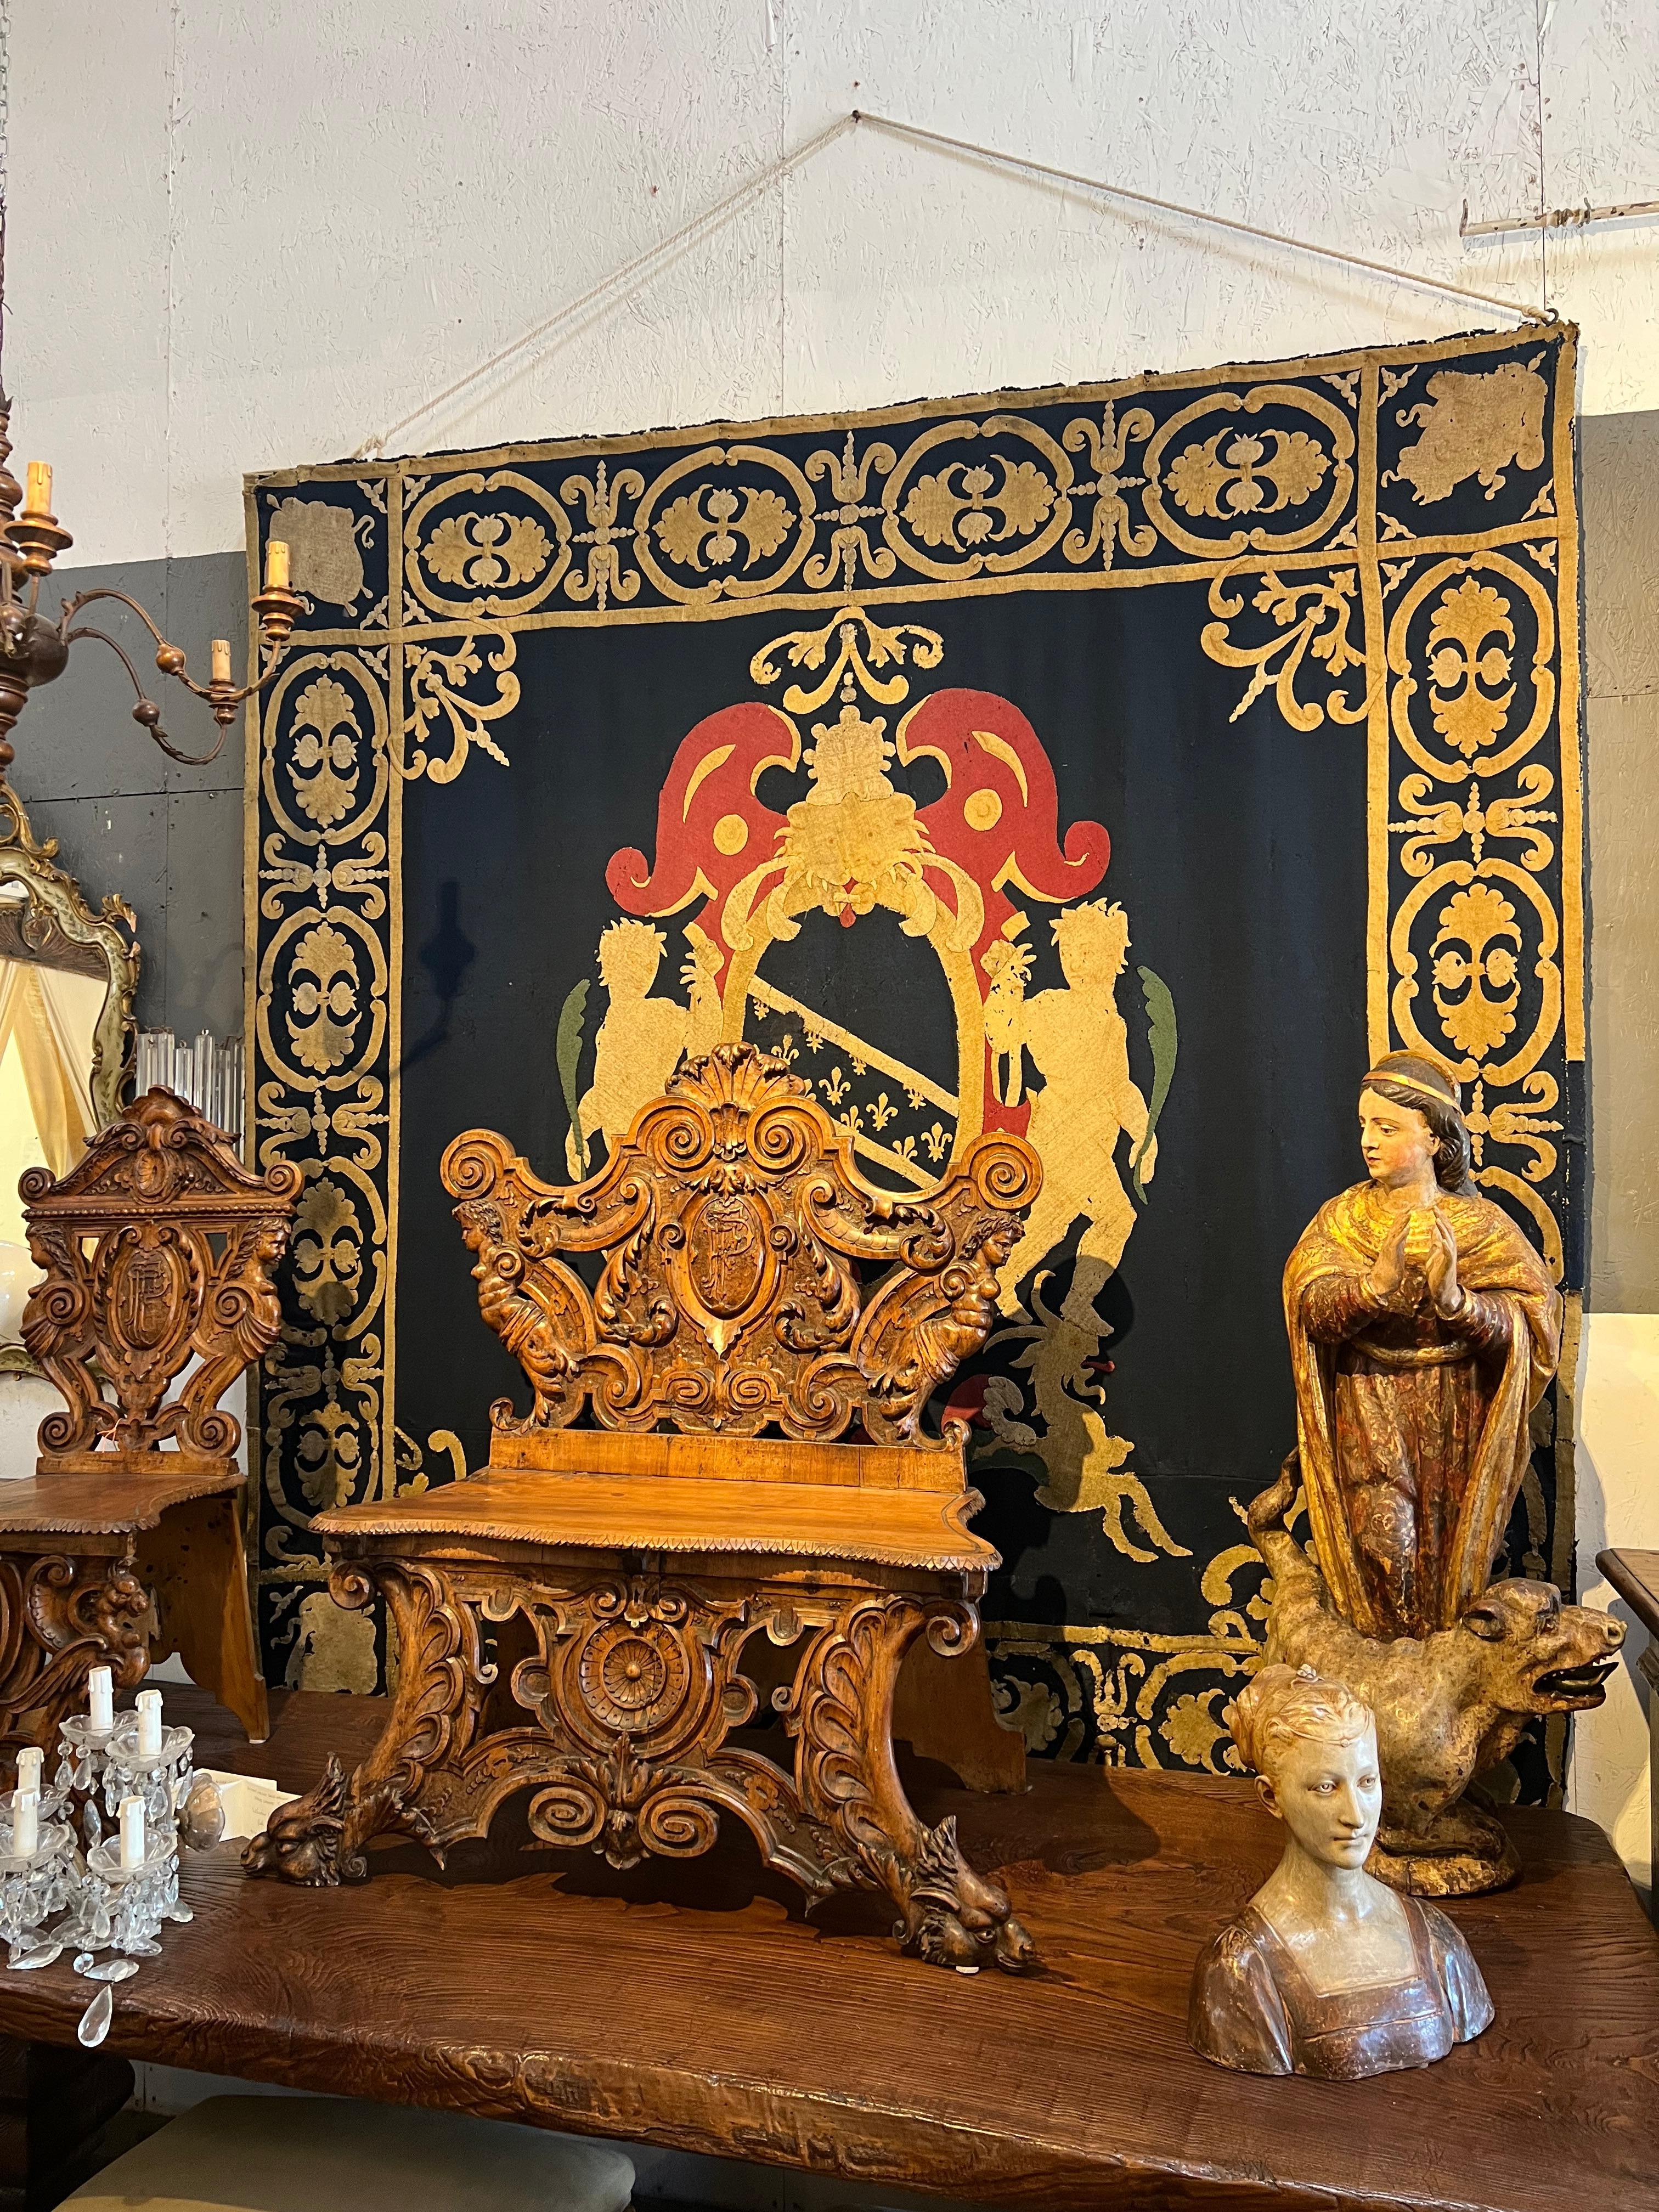 Aristocratic style is presented by this tapestry; a heraldic coat of arms formed by woolen cloth of different colors applied in collage on blue woolen cloth. Lucchese (Lucca) manufacture of the late 17th century, circa 1690. The central shield